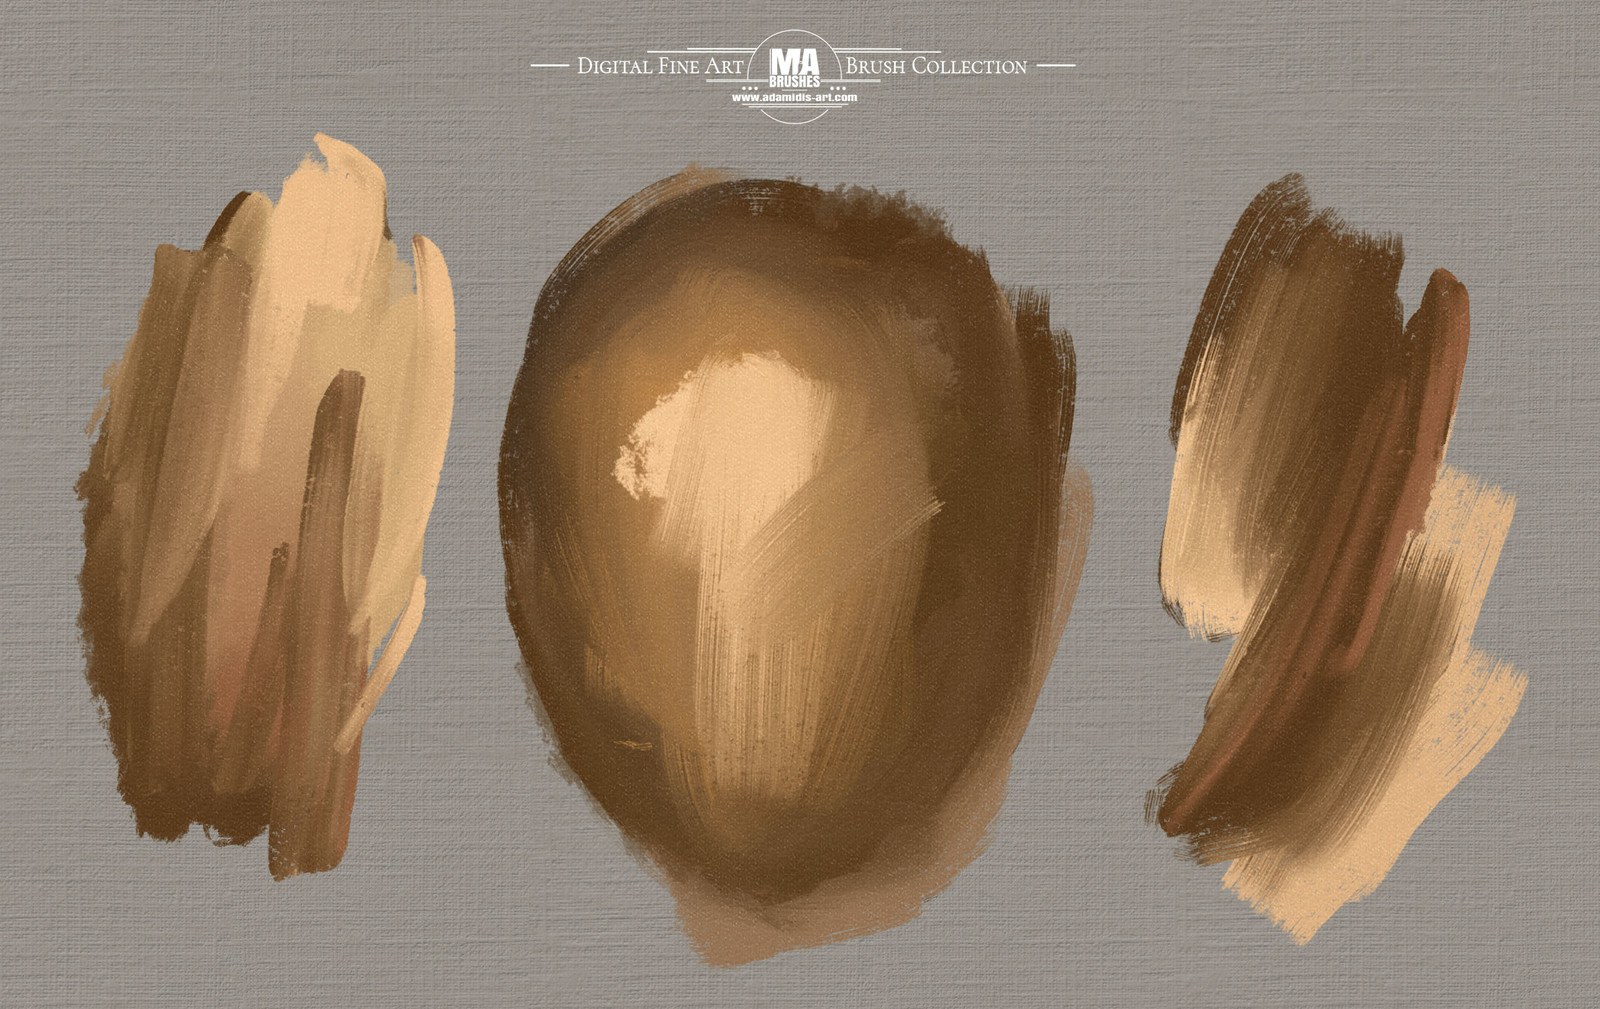 MA - Photoshop ART Brushes - Most realistic and authentic Photoshop Oil